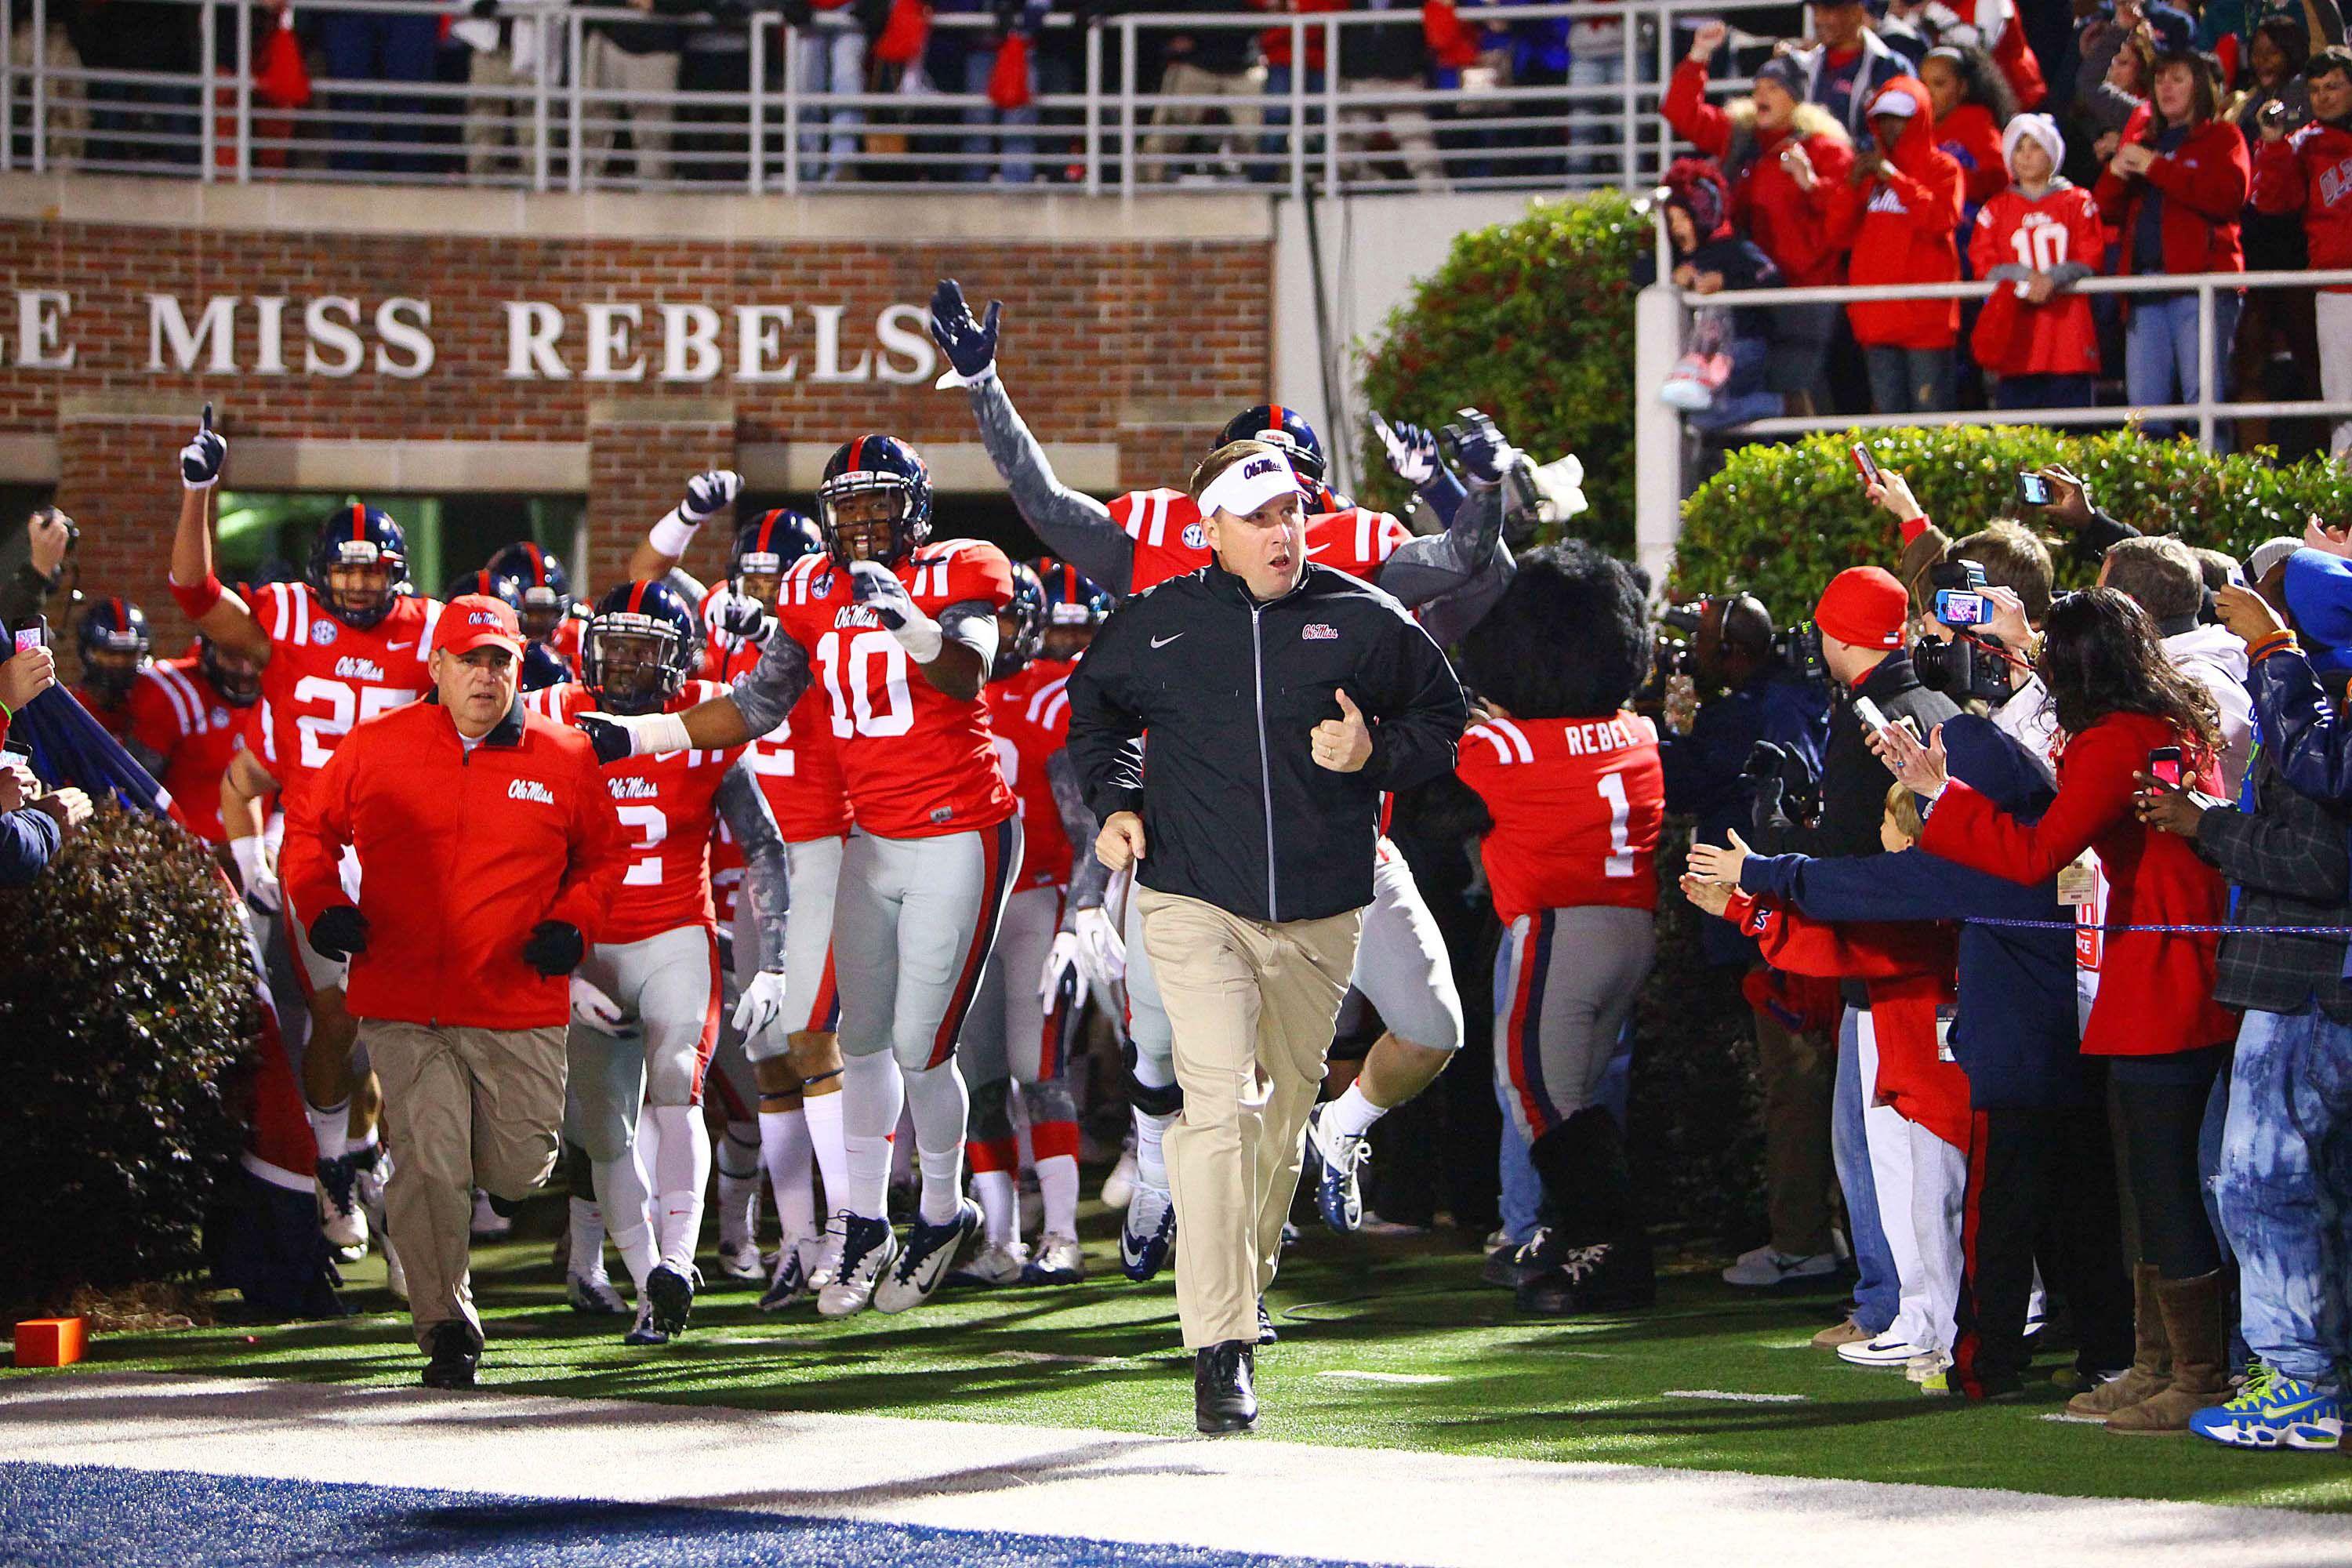 Hugh Freeze is rattling cages with Ole Miss recruiting. Sports